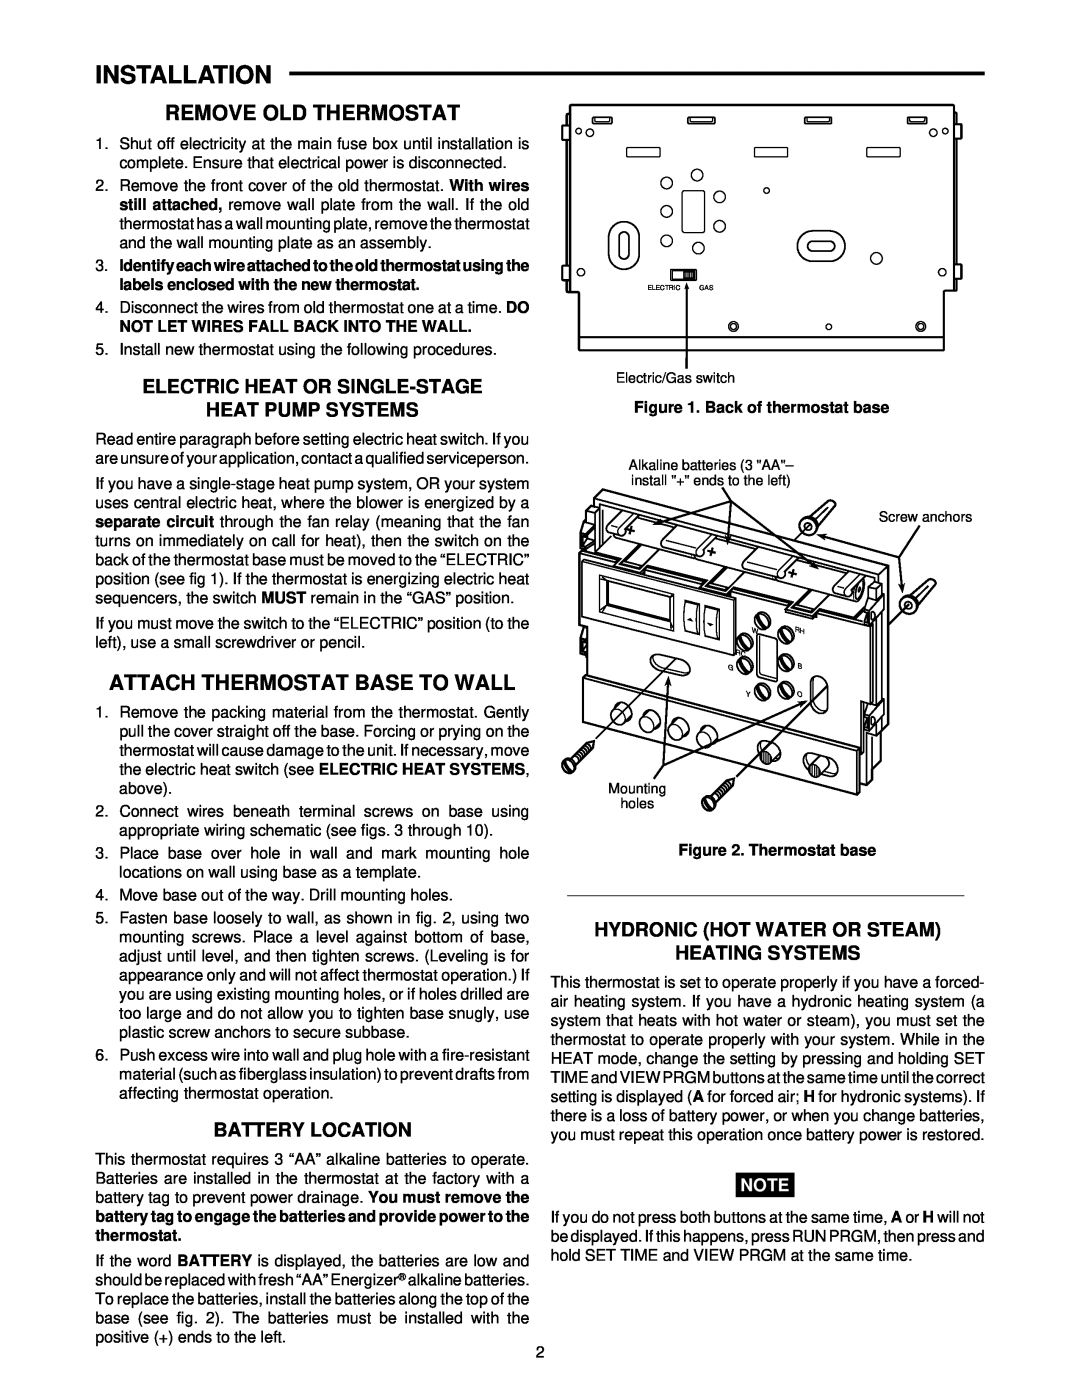 White Rodgers 1F80-51 specifications Installation, Remove Old Thermostat, Attach Thermostat Base To Wall, Battery Location 